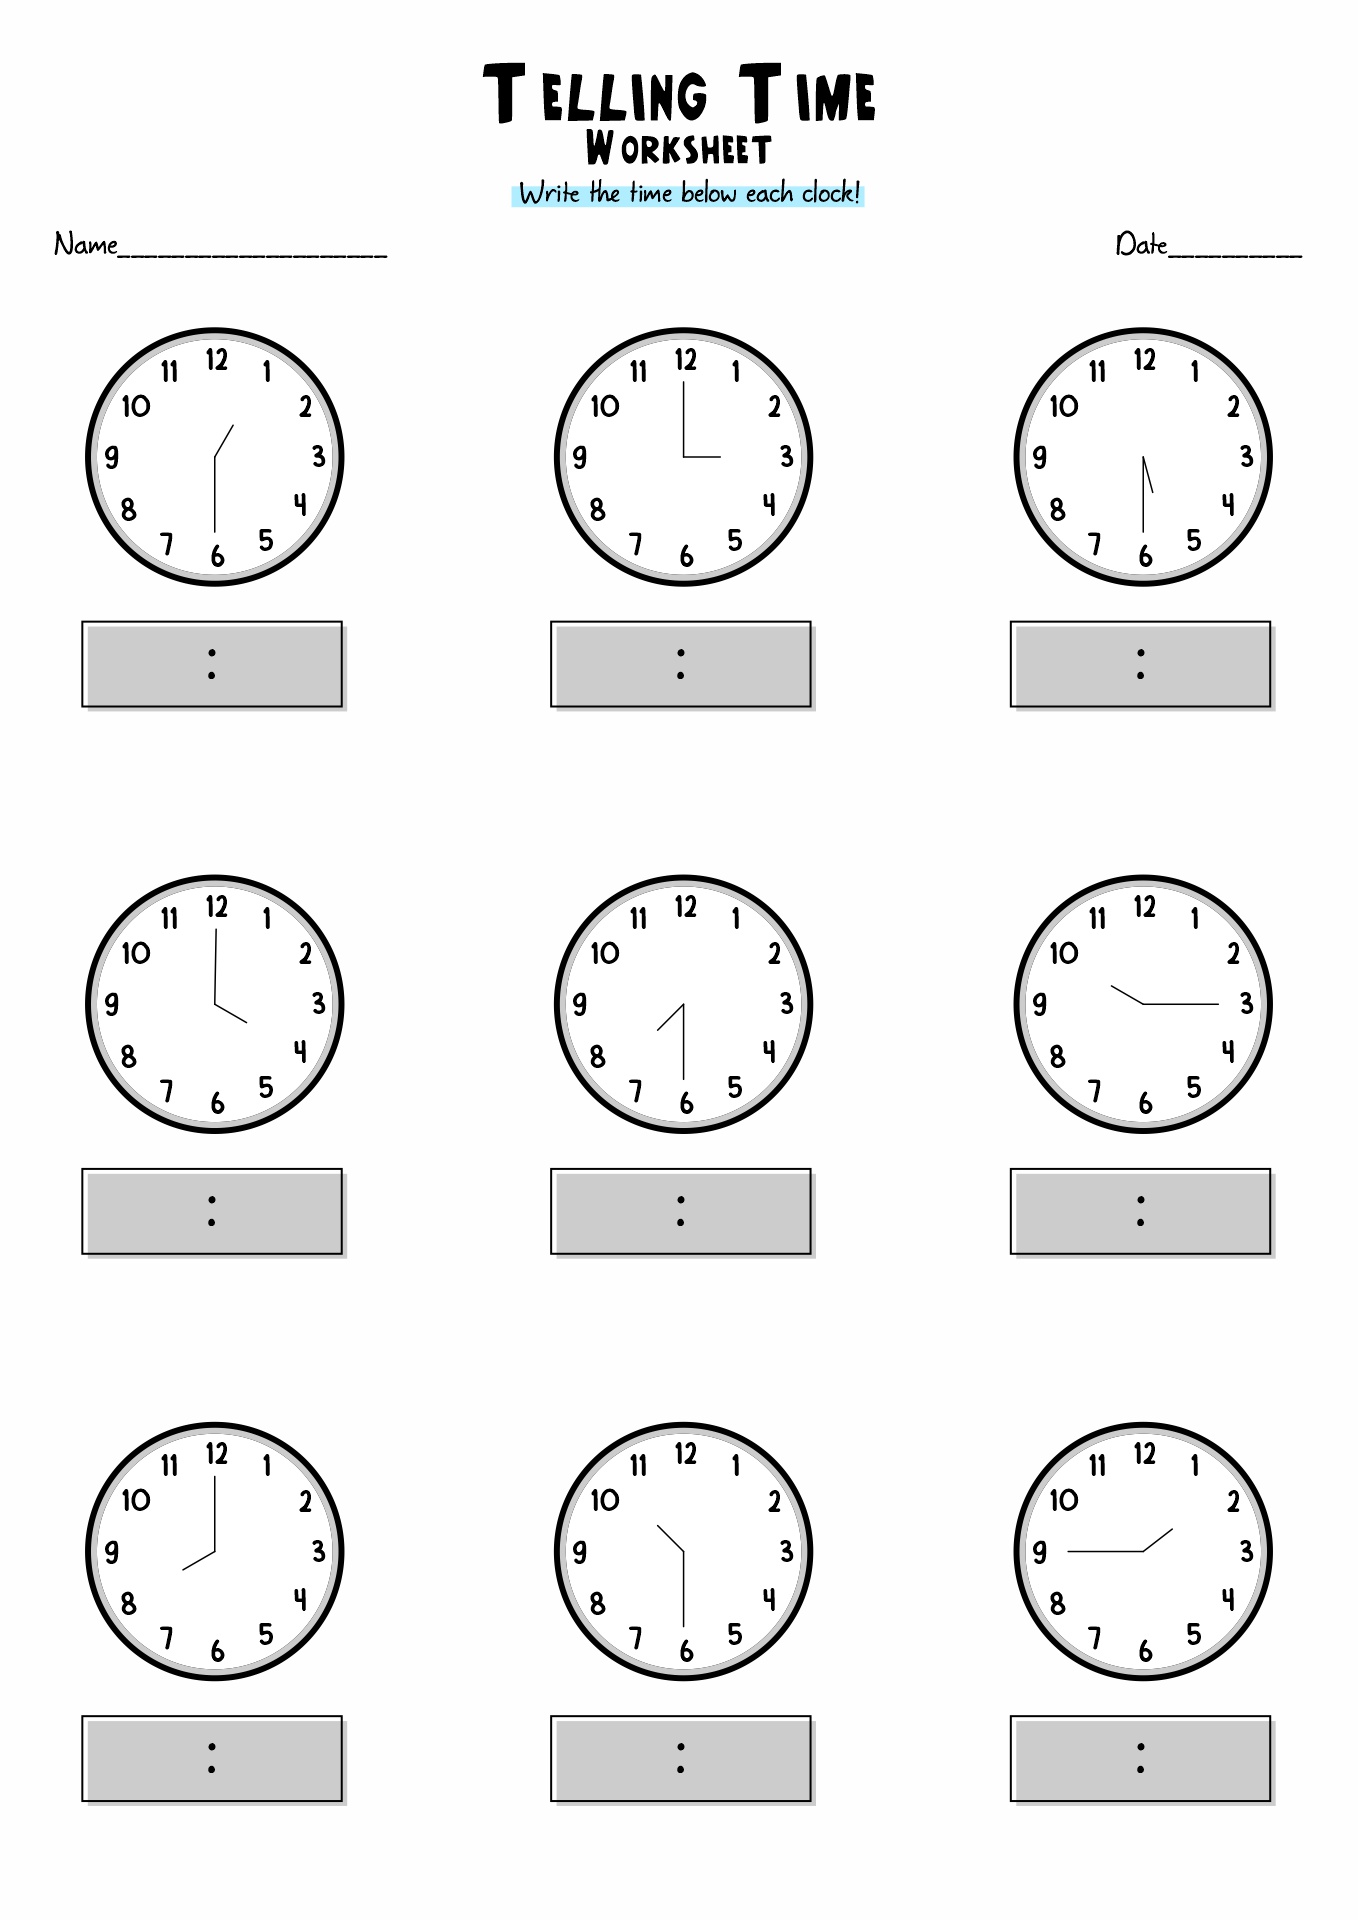 17 Images of Time Worksheets For 3rd Grade